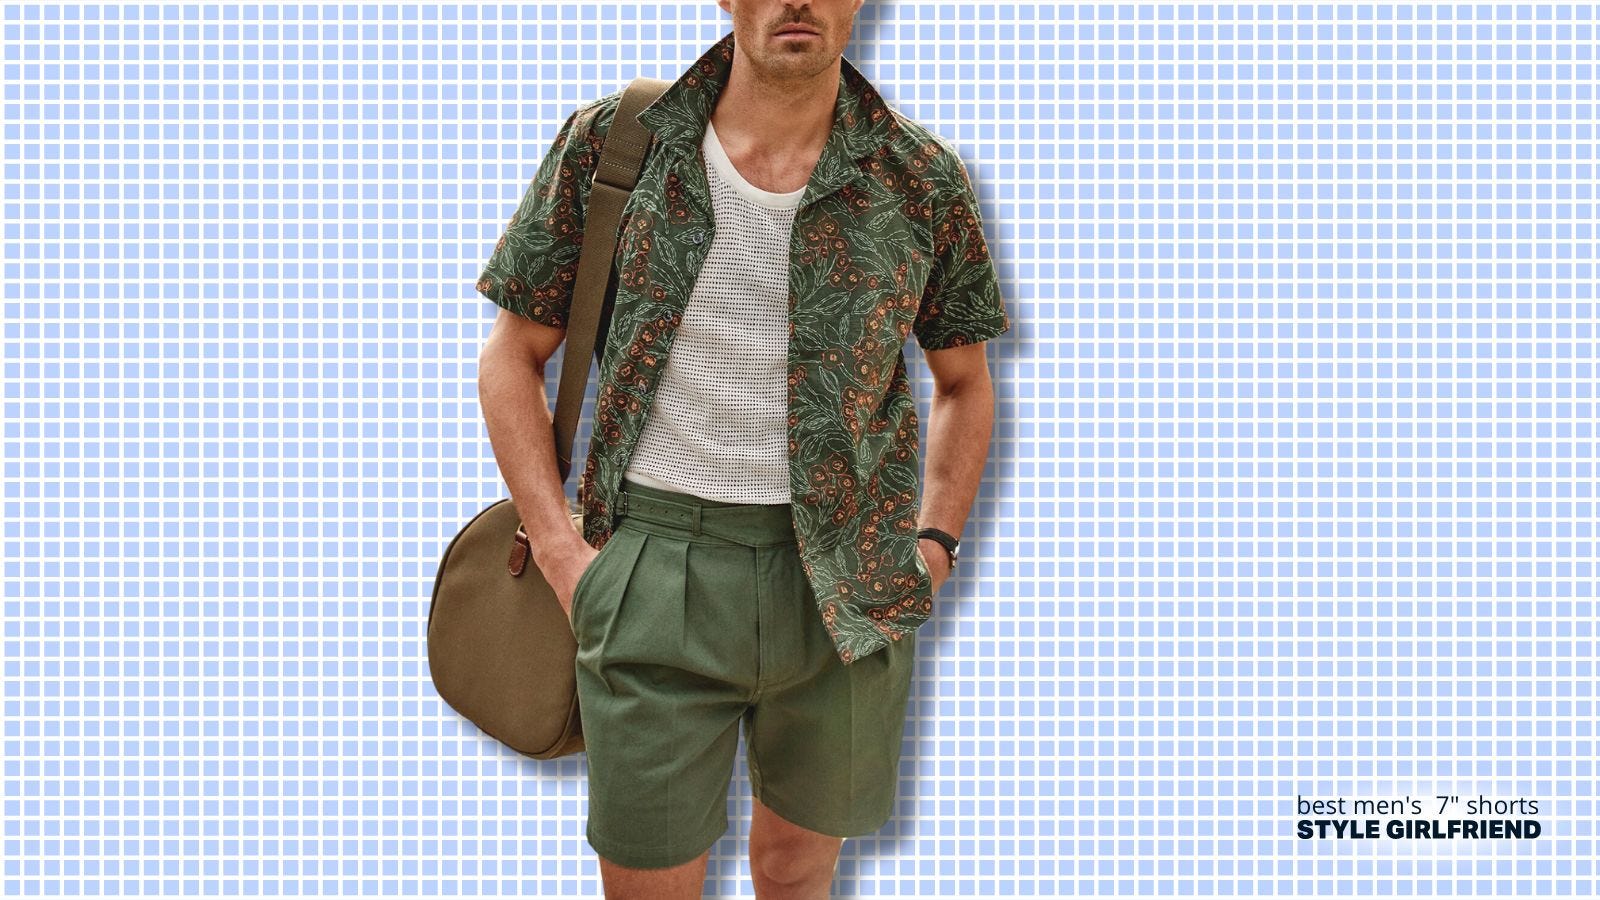 torso of man wearing a sophisticated green patterned short sleeve shirt over a white shirt with green pleated shorts. a weekender bag is slung over his shoulder